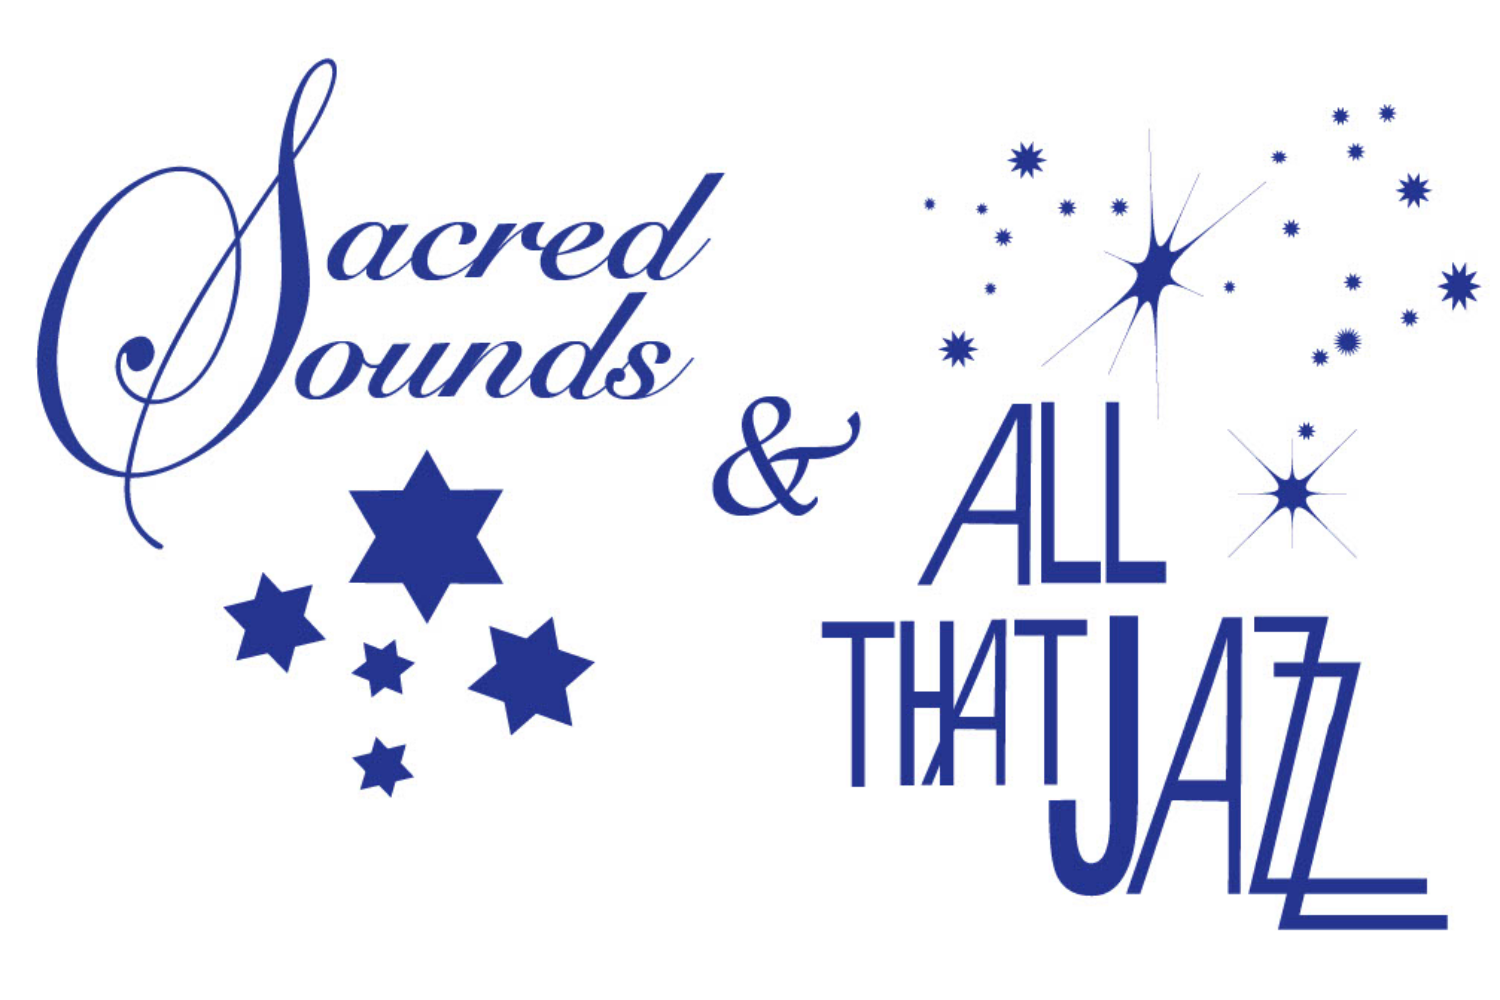 Sacred Sounds & All that Jazz